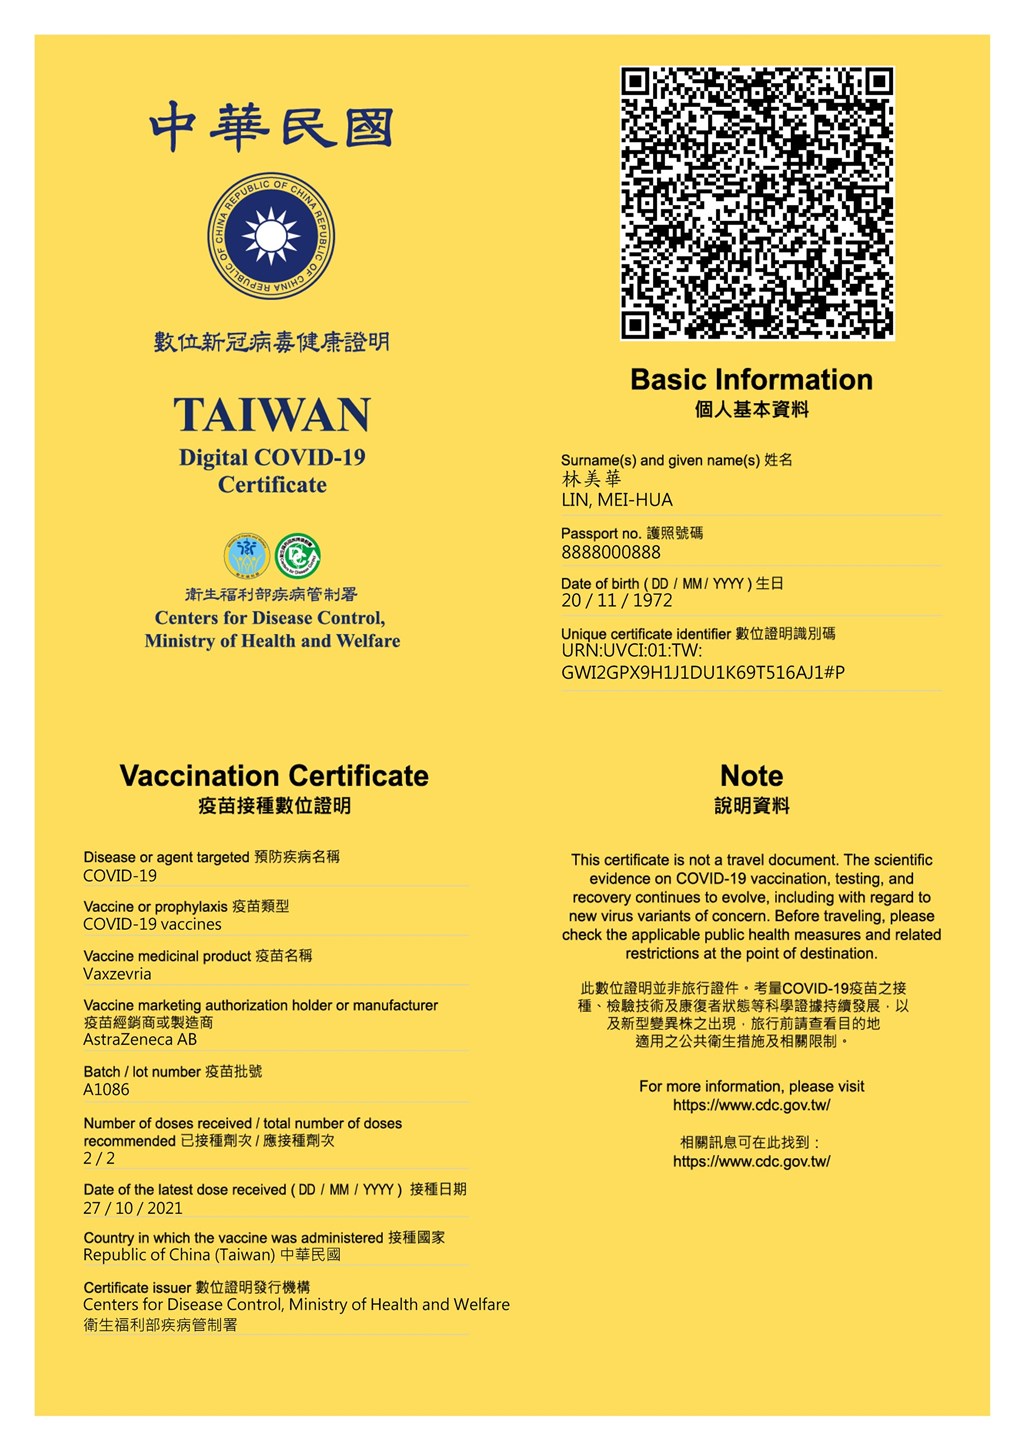 Taiwan Digital Covid 19 Certificate To Be Available Tuesday Focus Taiwan